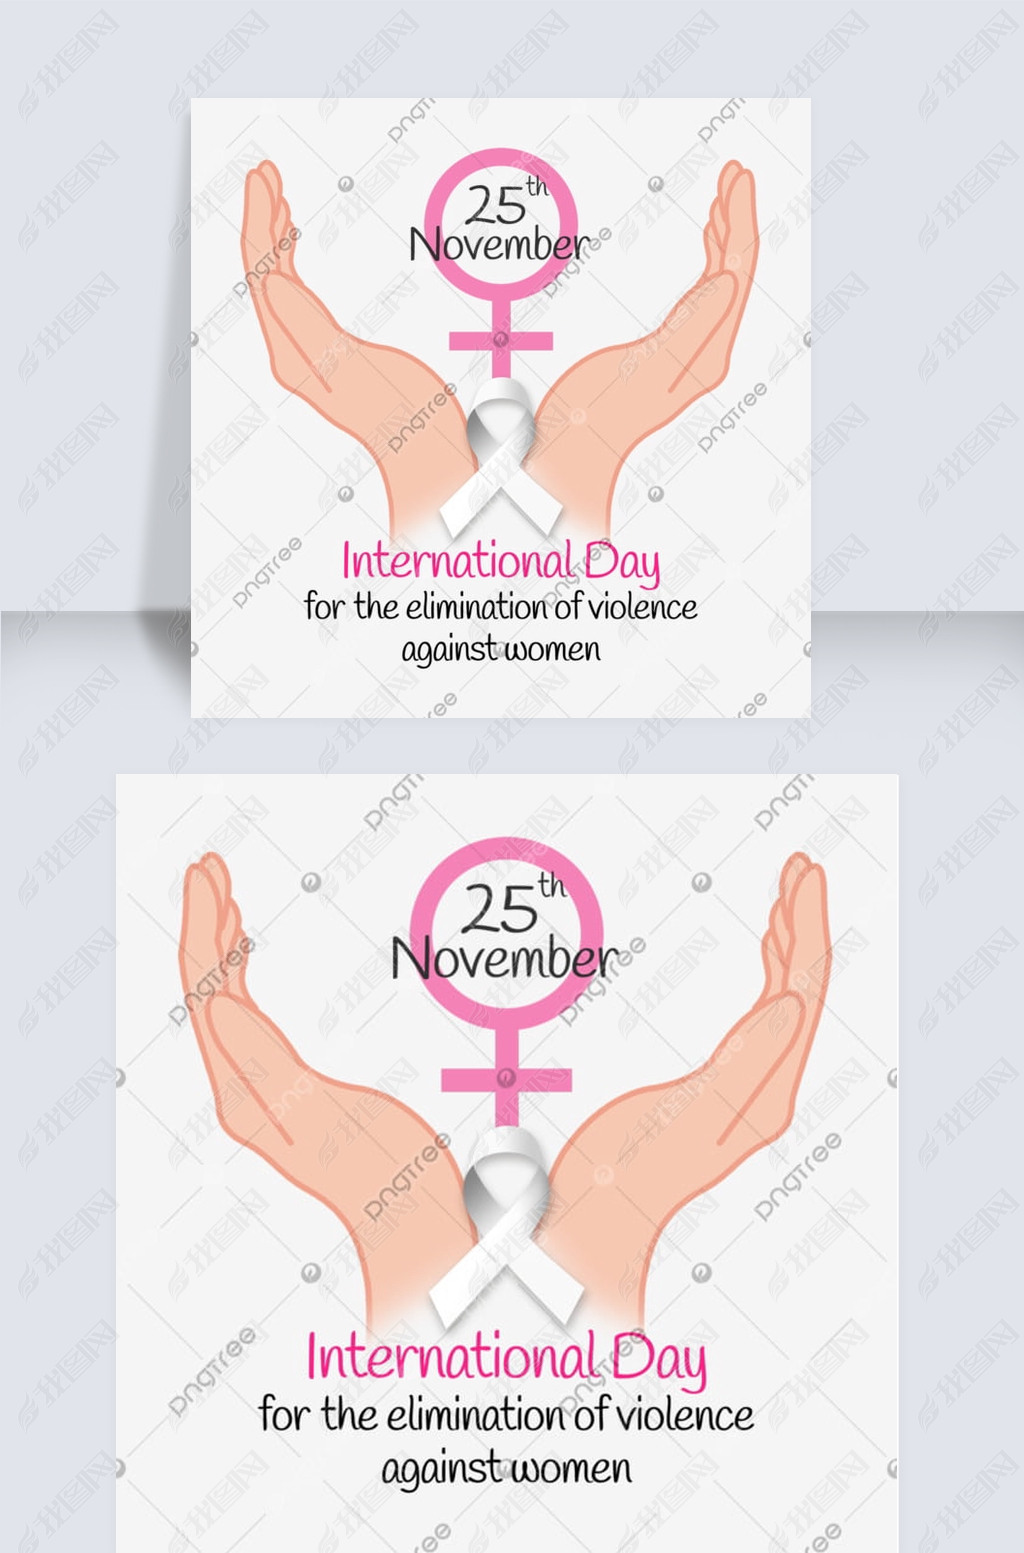 ǻŮday for the elimination of violence against women